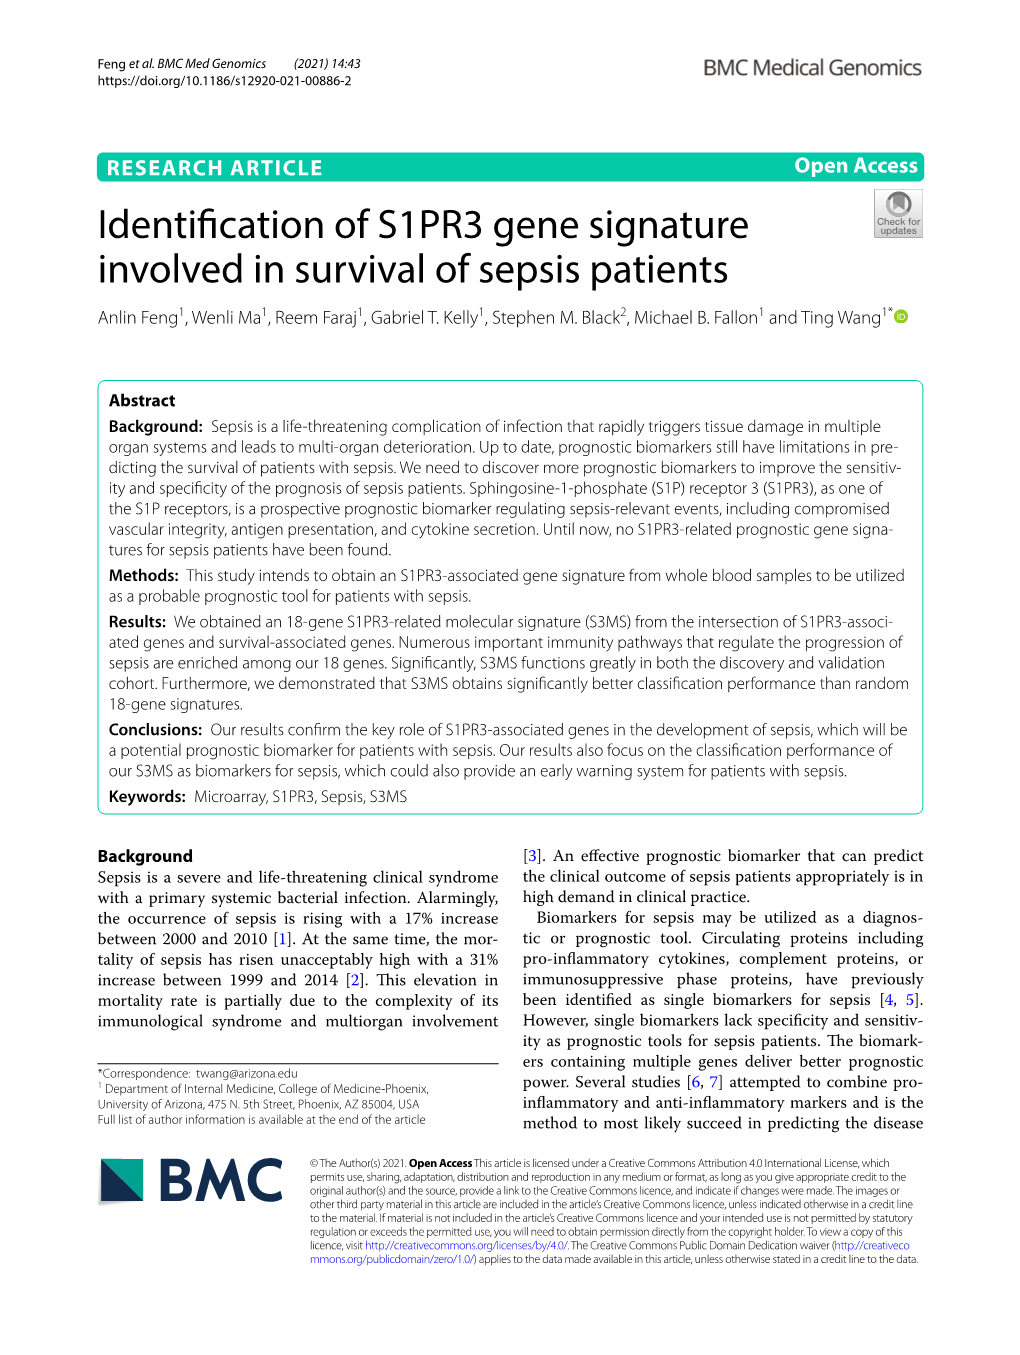 Identification of S1PR3 Gene Signature Involved in Survival of Sepsis Patients